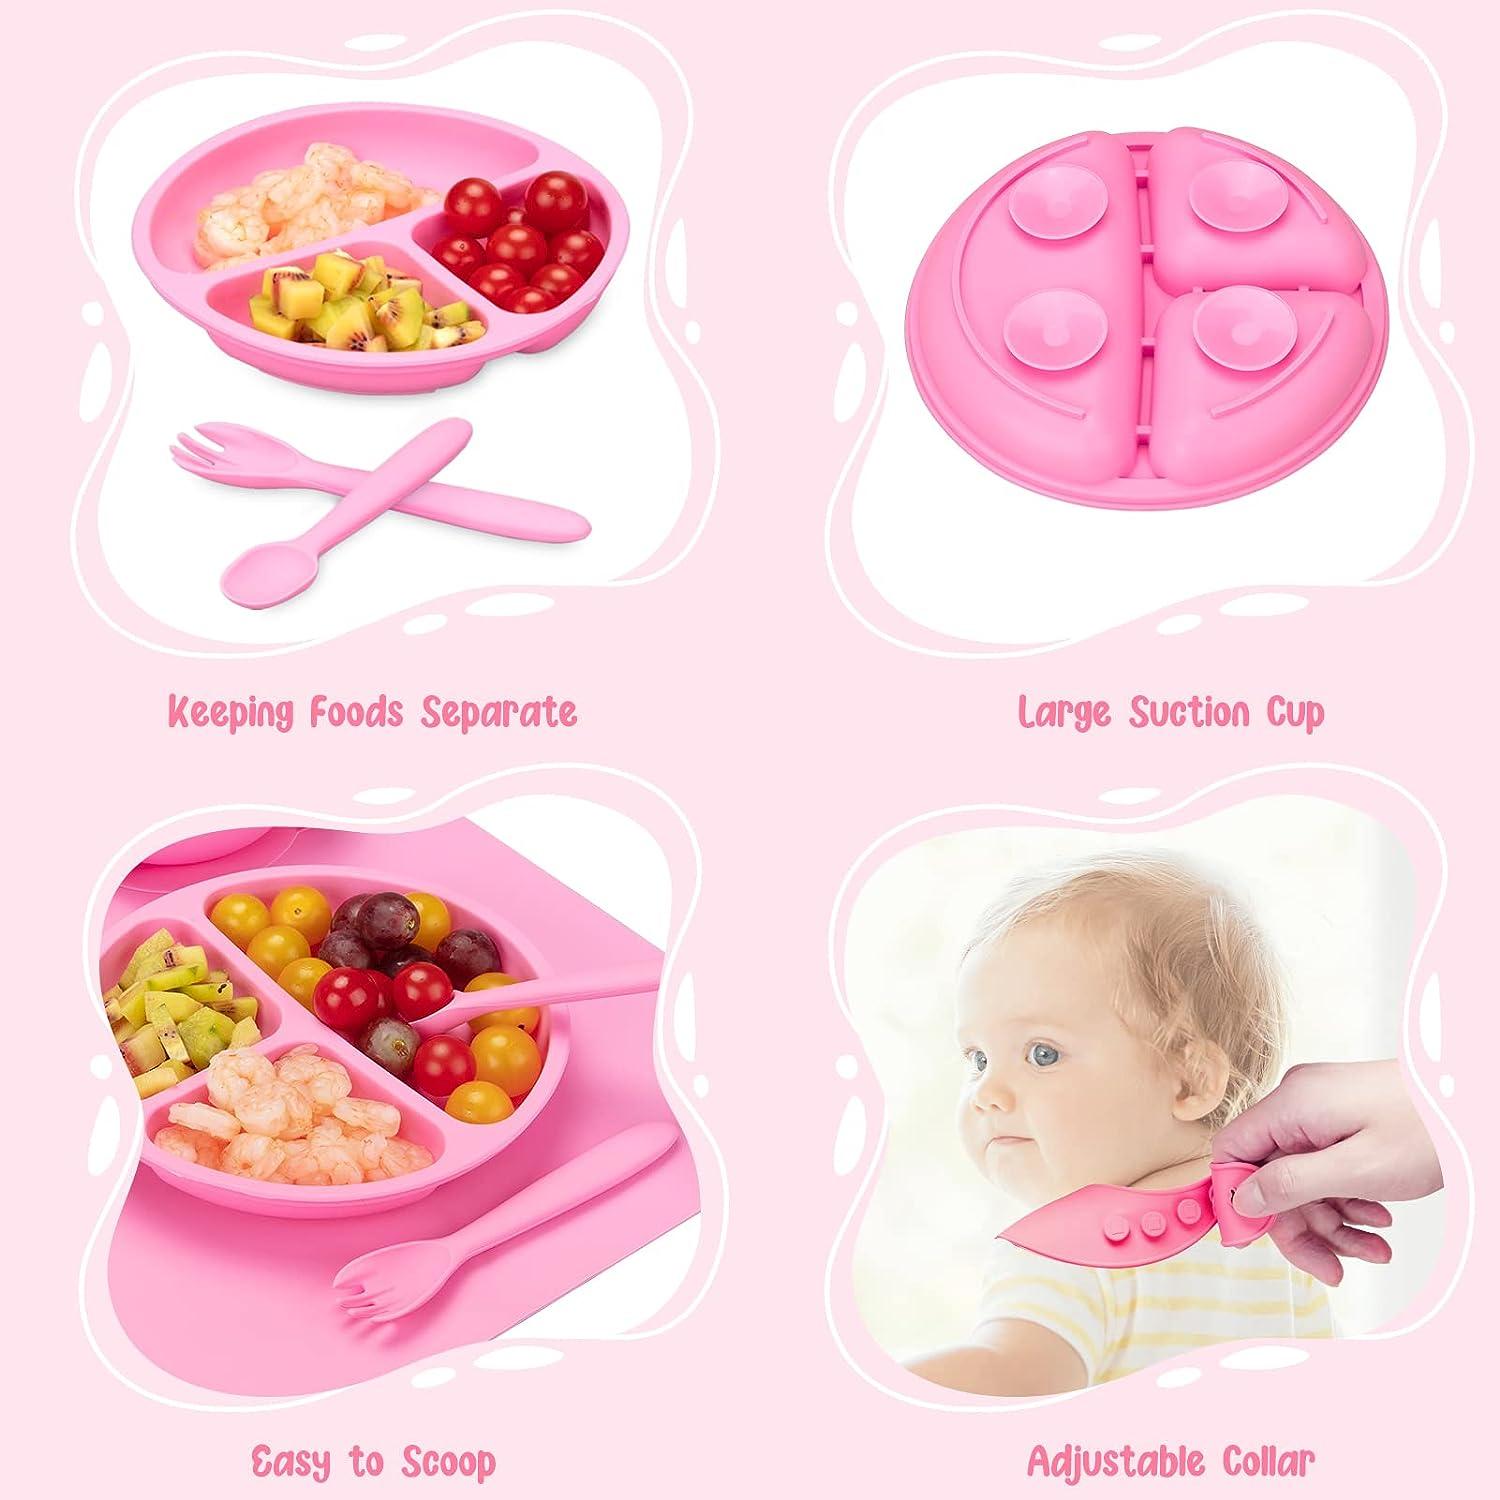 Little Keegs Baby Feeding Set - Baby Must Haves Gift Set - Baby Led Weaning  Supplies - Toddler Silicone Dishes - Suction Baby Bowl, Bib, Snack Cup,  Utensils, Baby Plate Set of 8 (Pink) 